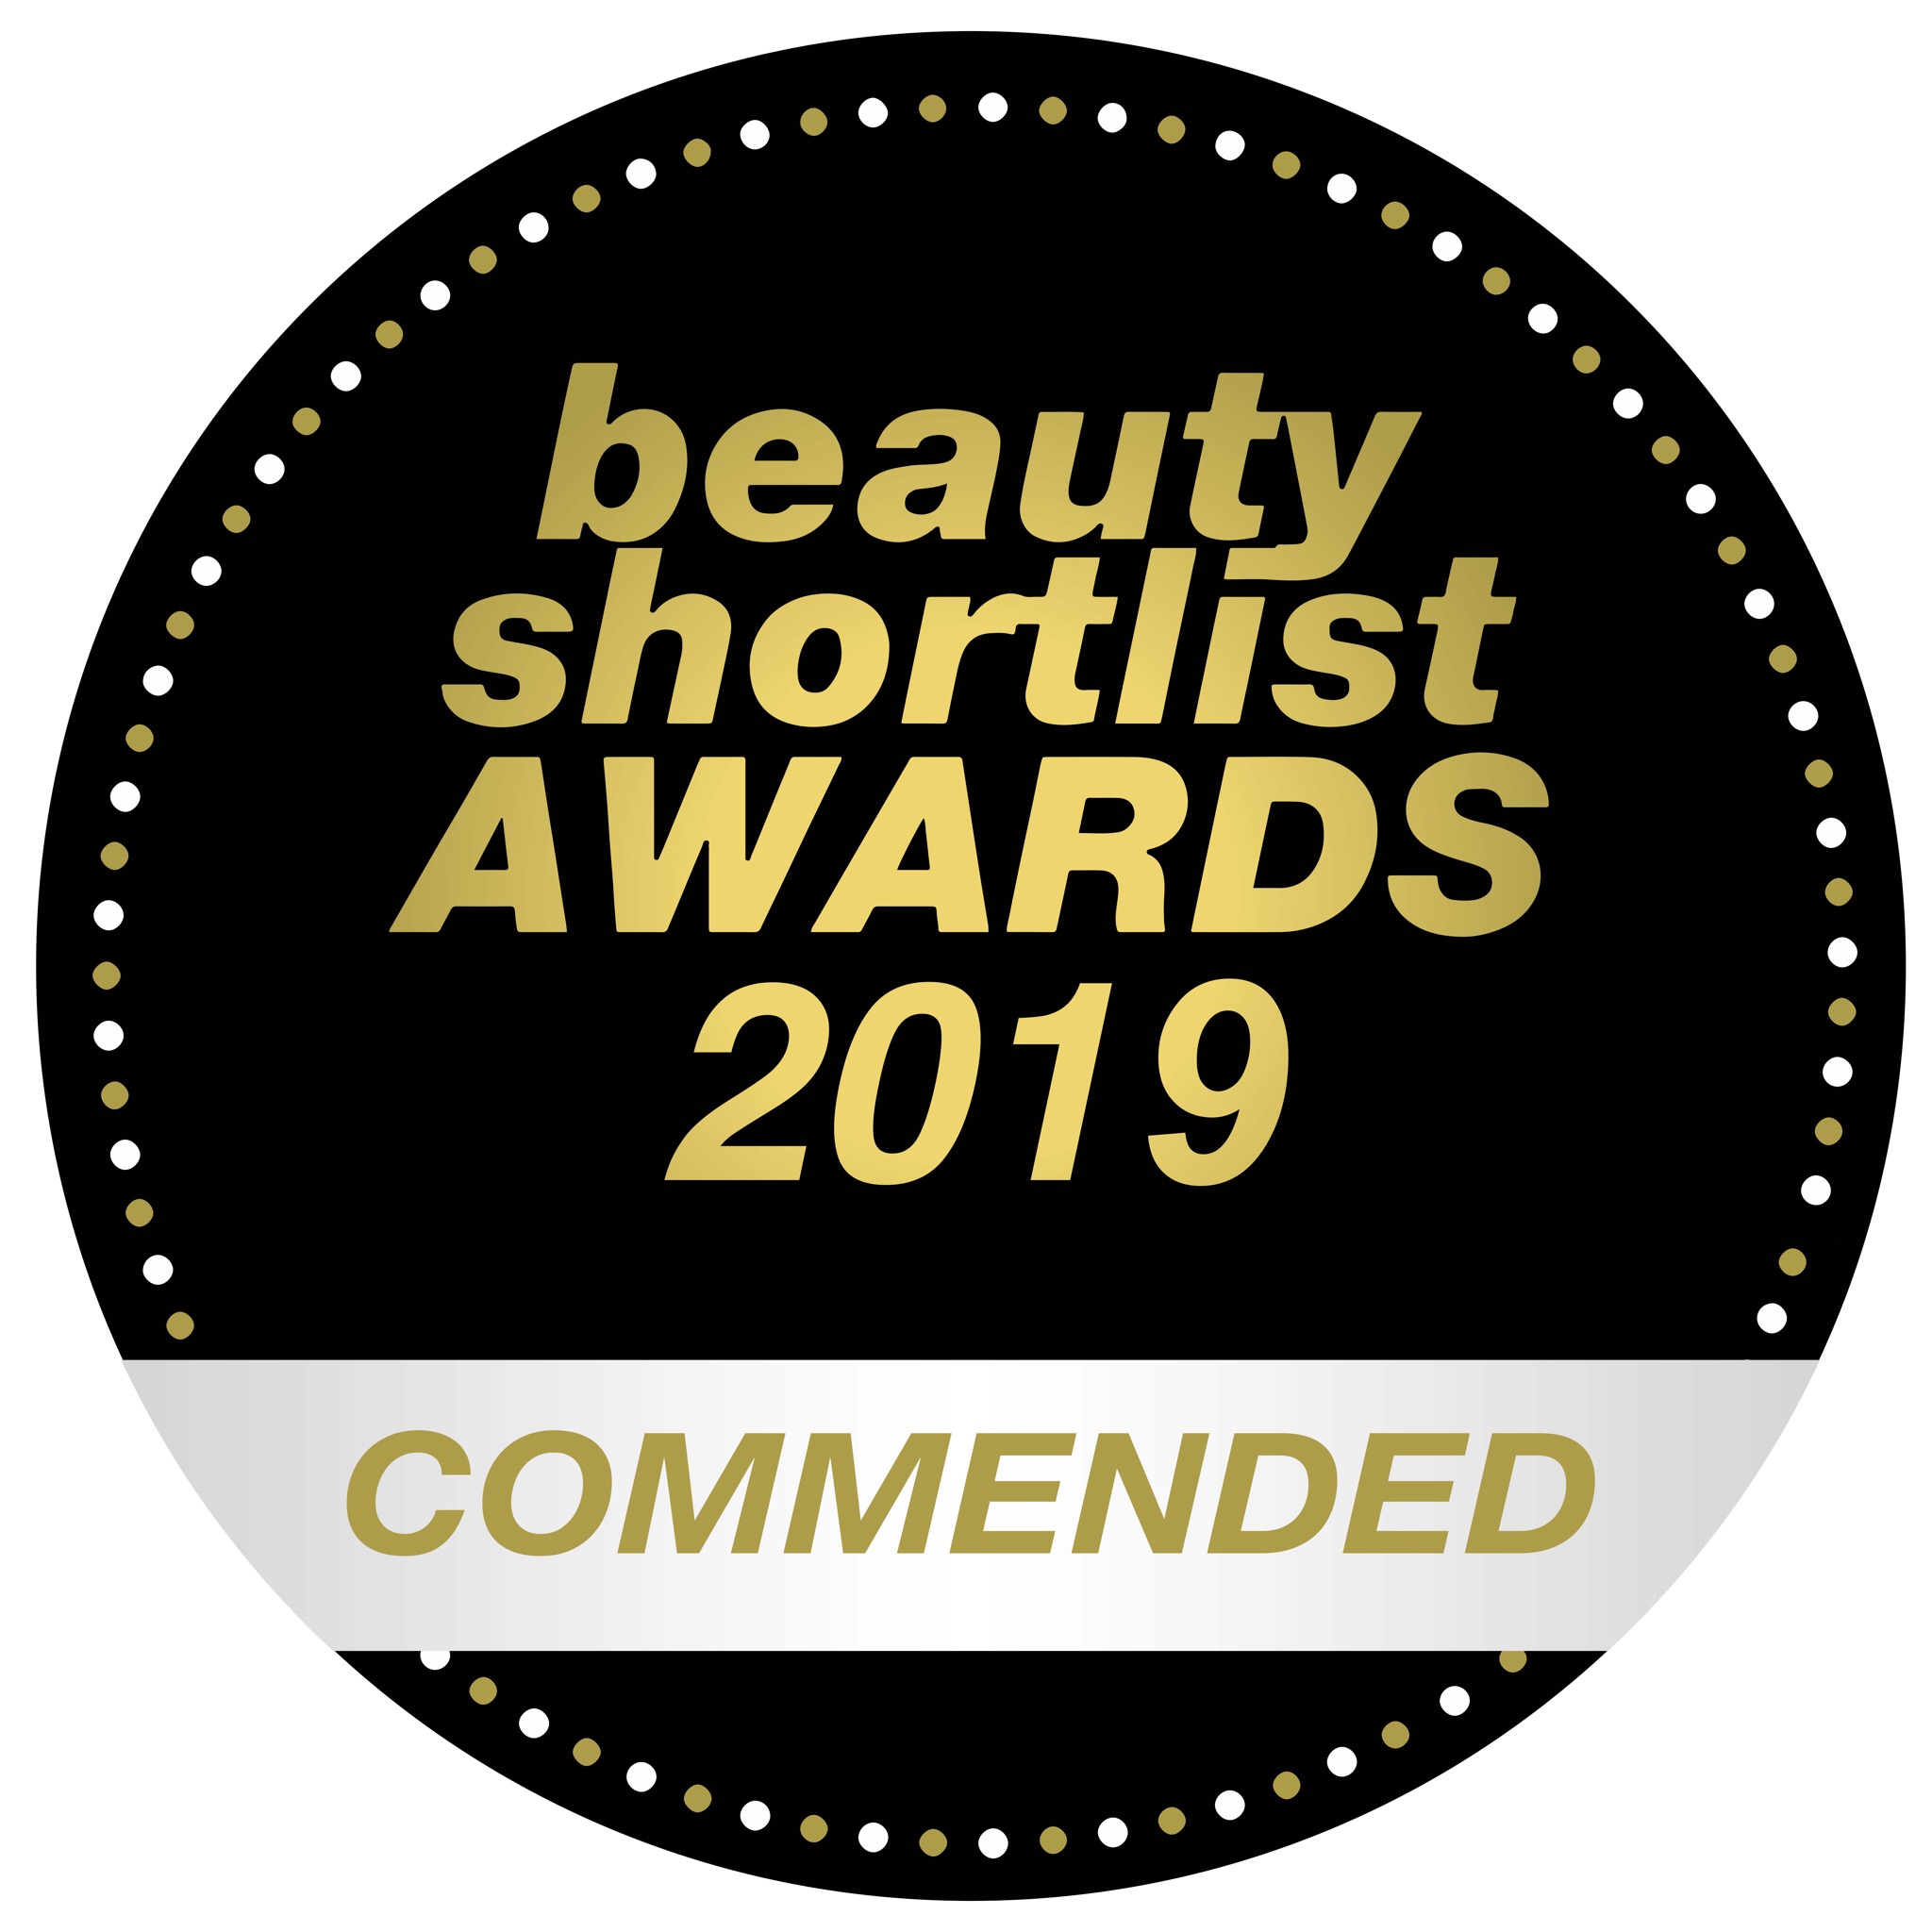 Beauty Shortlist Awards Commended